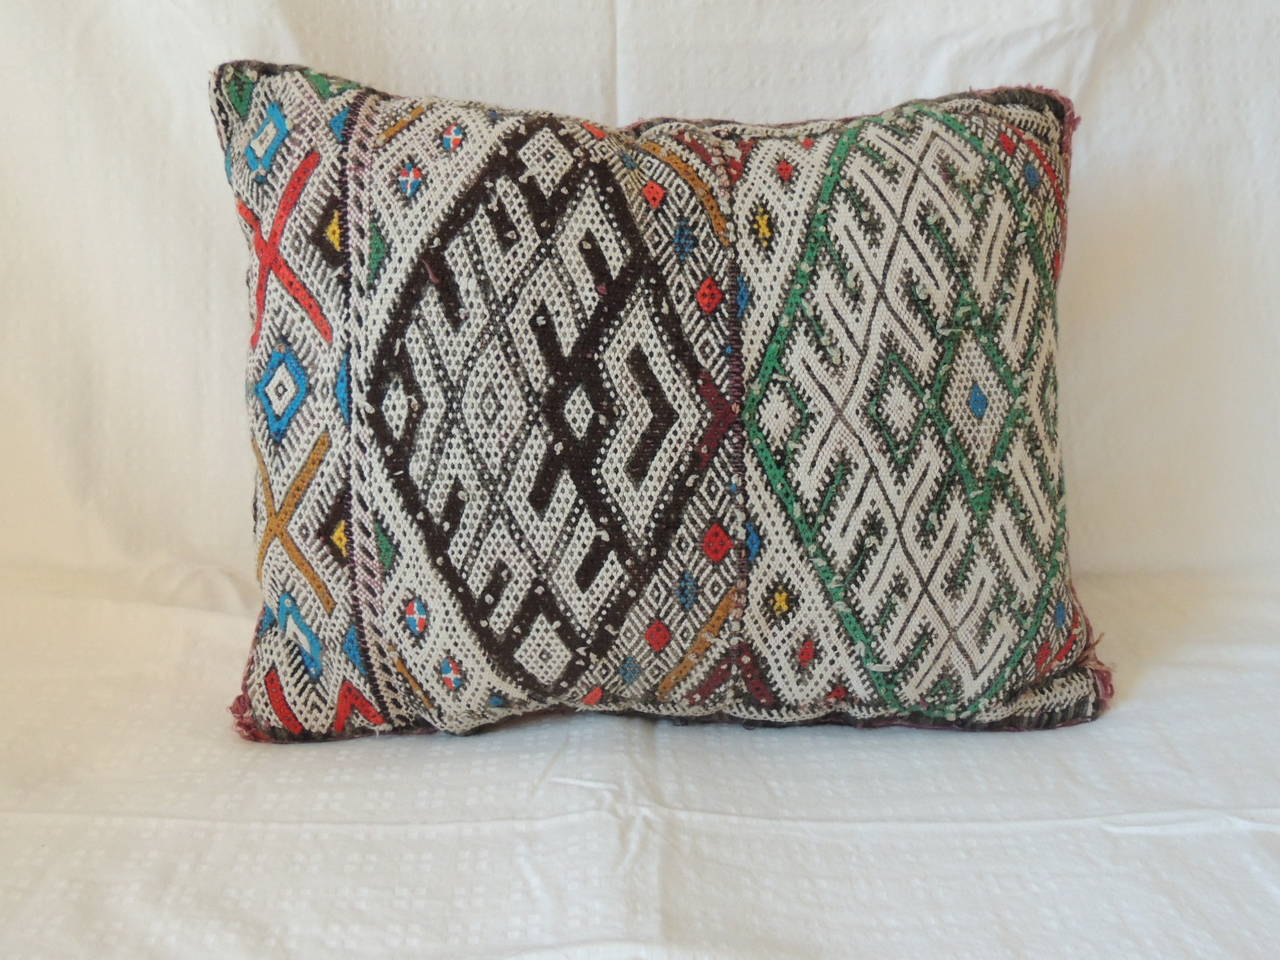 Vintage Green and black Moroccan decorative pillow, with kilim texture textile. and stripe red backing.